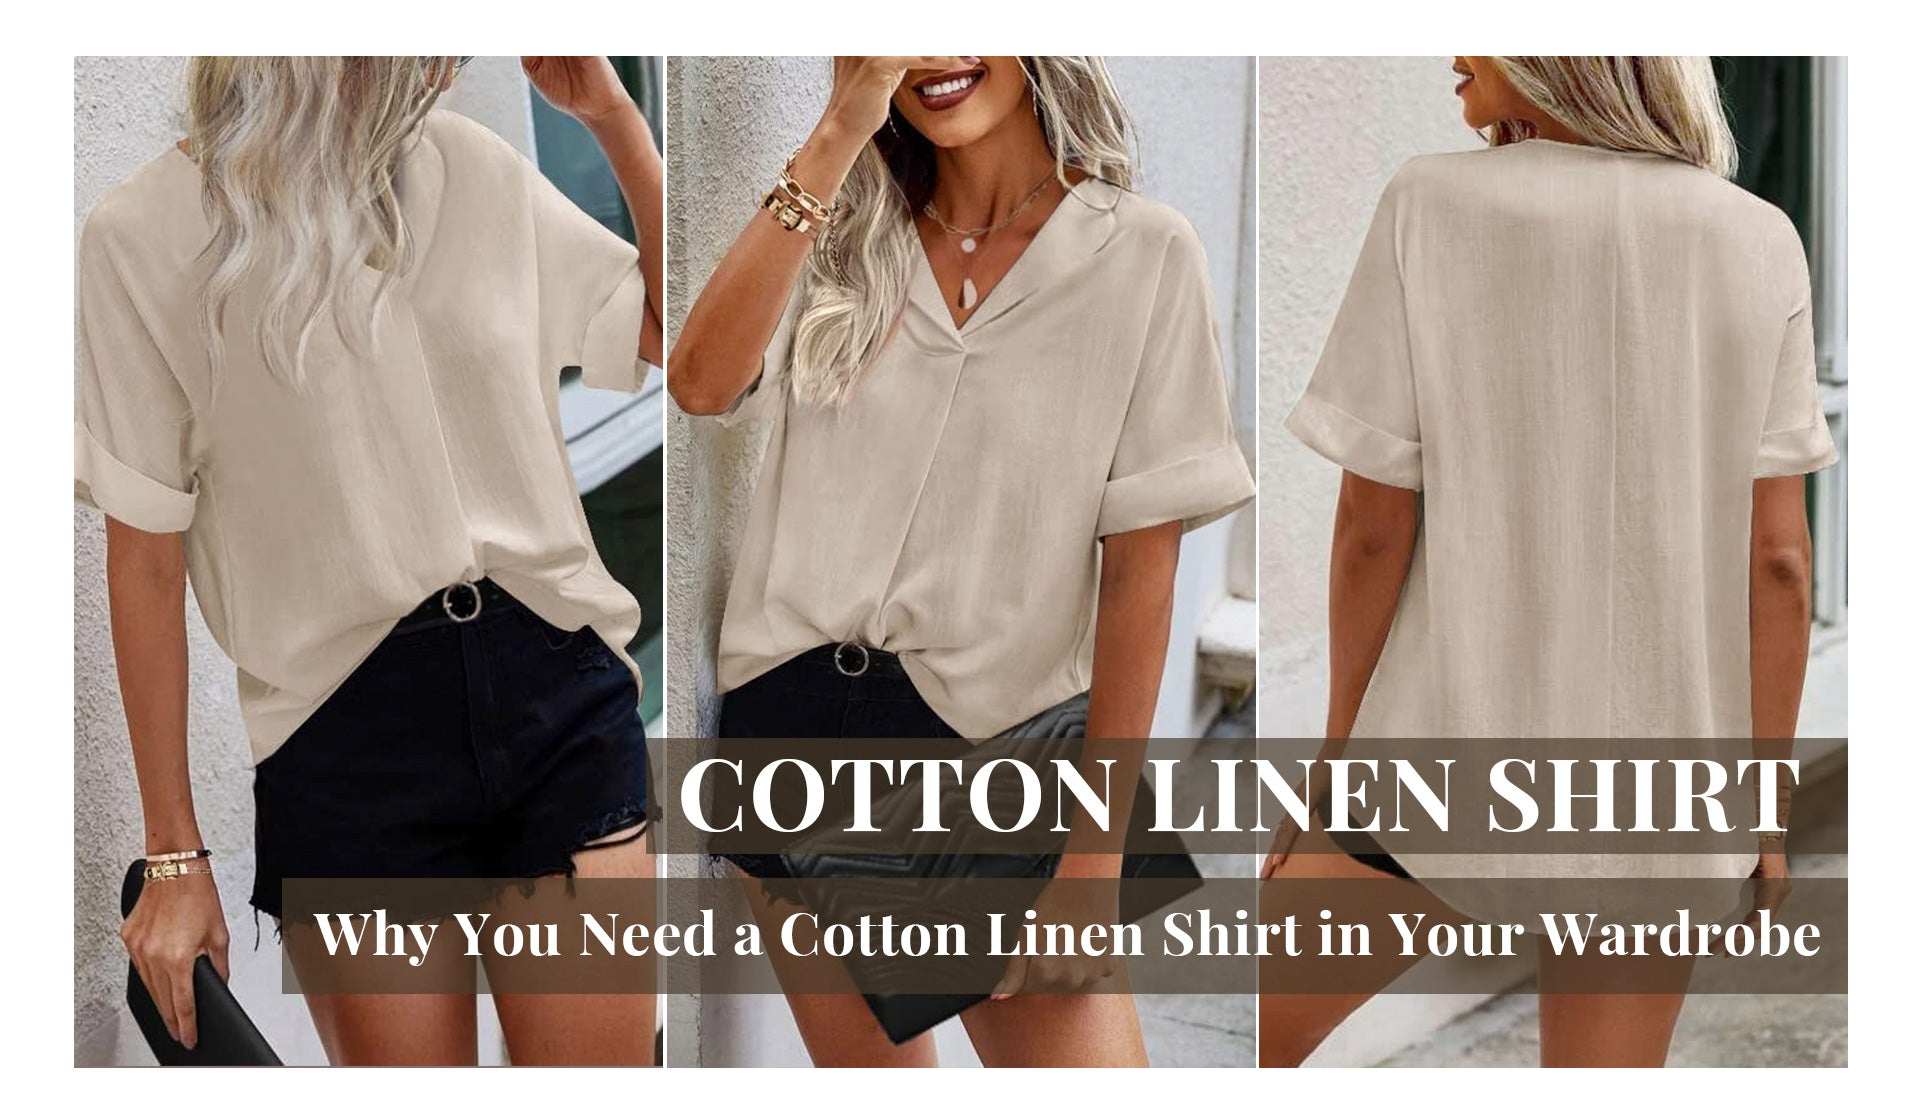 Why You Need a Cotton Linen Shirt in Your Wardrobe